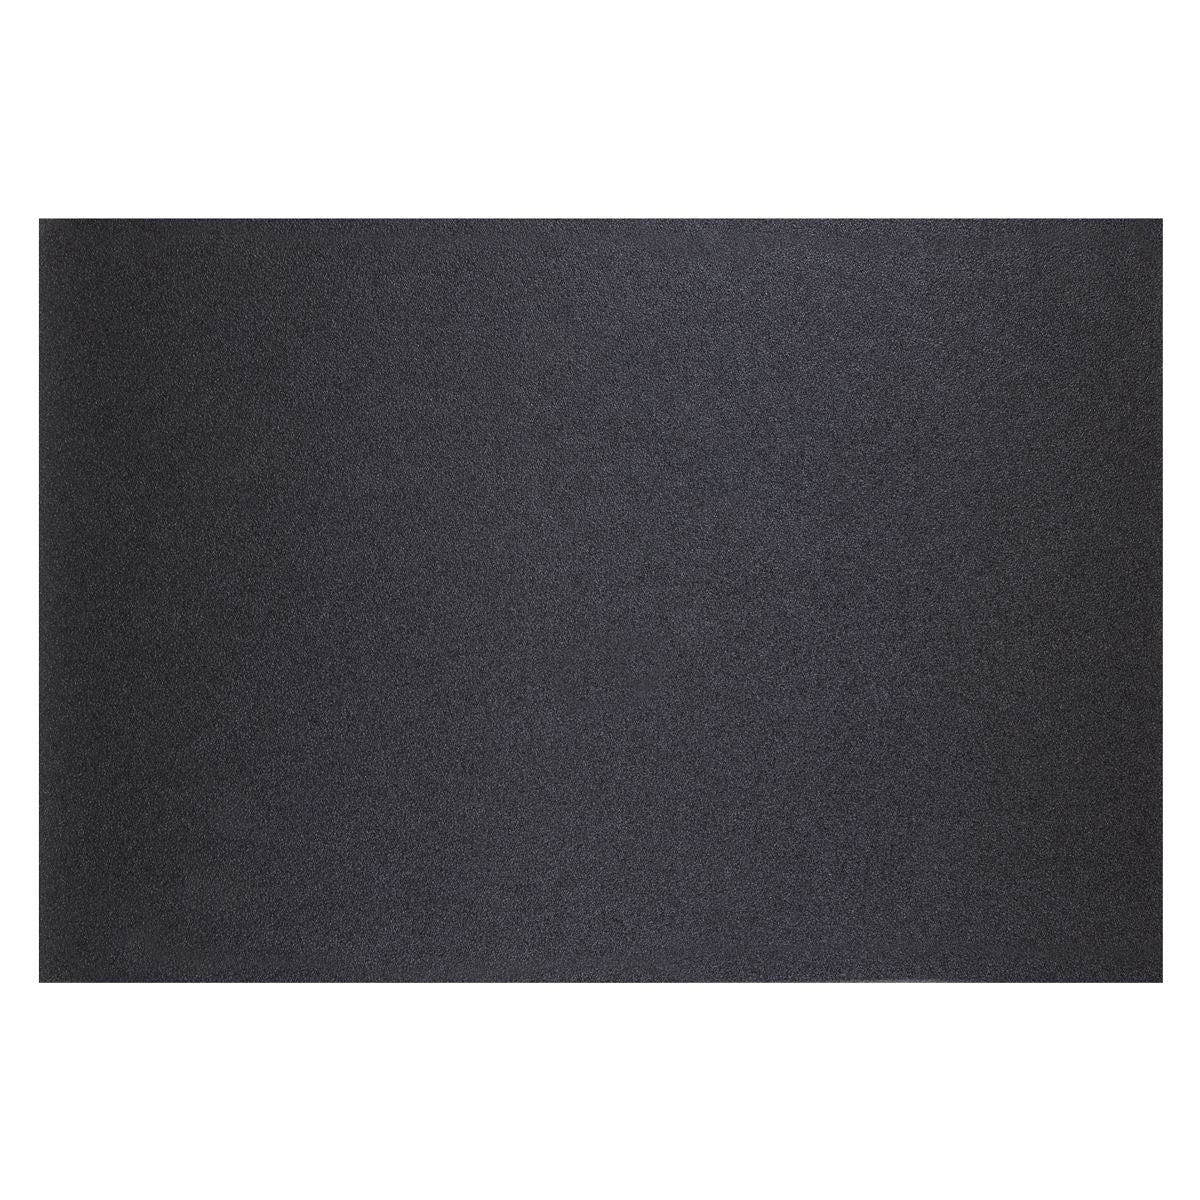 Worksafe by Sealey Orbital Sanding Sheets 12 x 18" 80Grit - Pack of 20